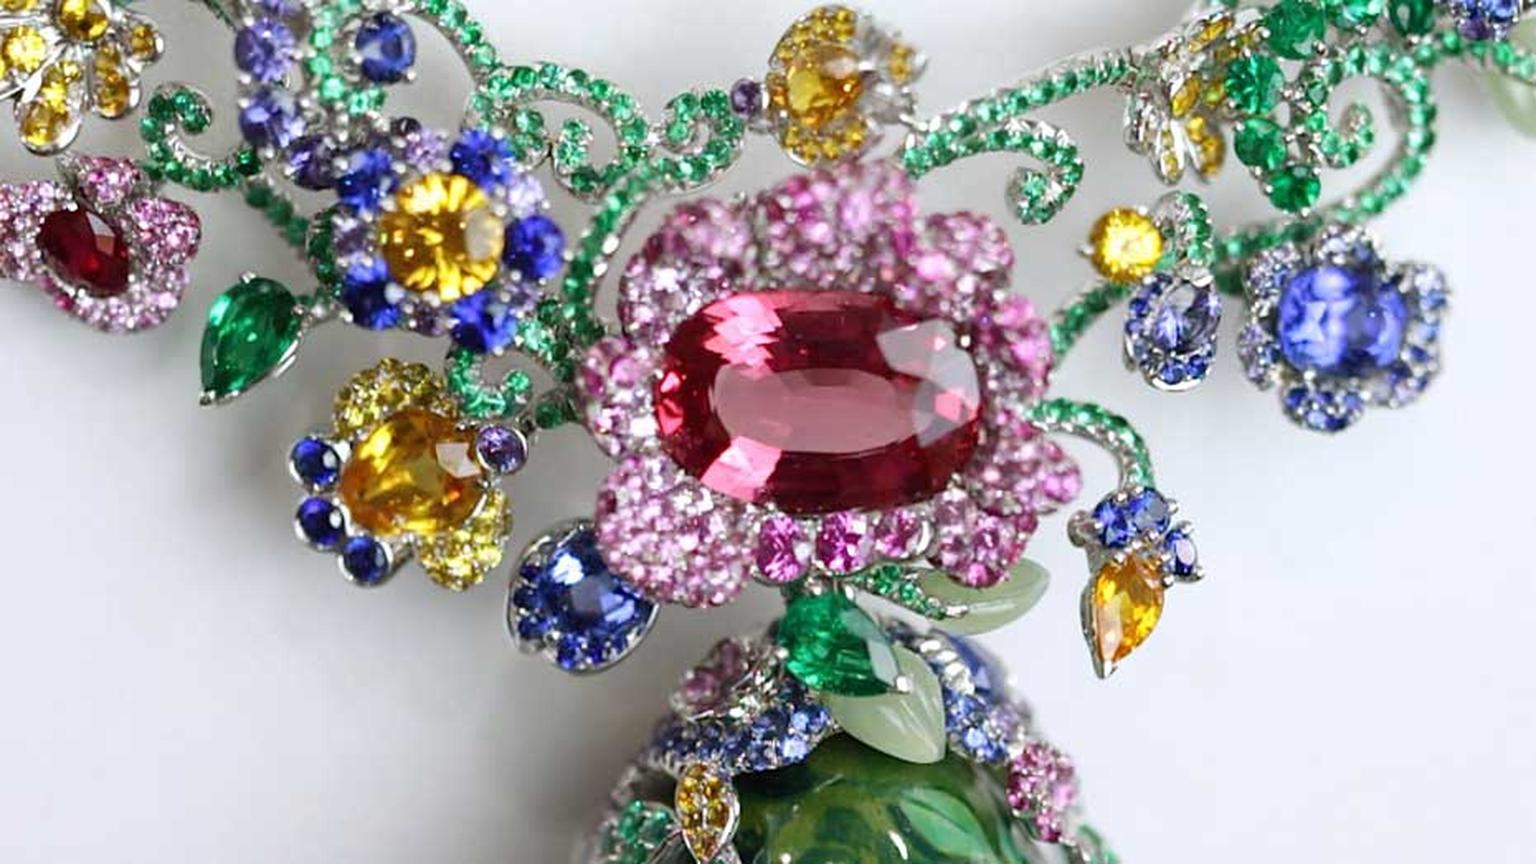 A closer look at the selection of beautiful brightly coloured gemstones that feature in the breathtaking Fabergé necklace.